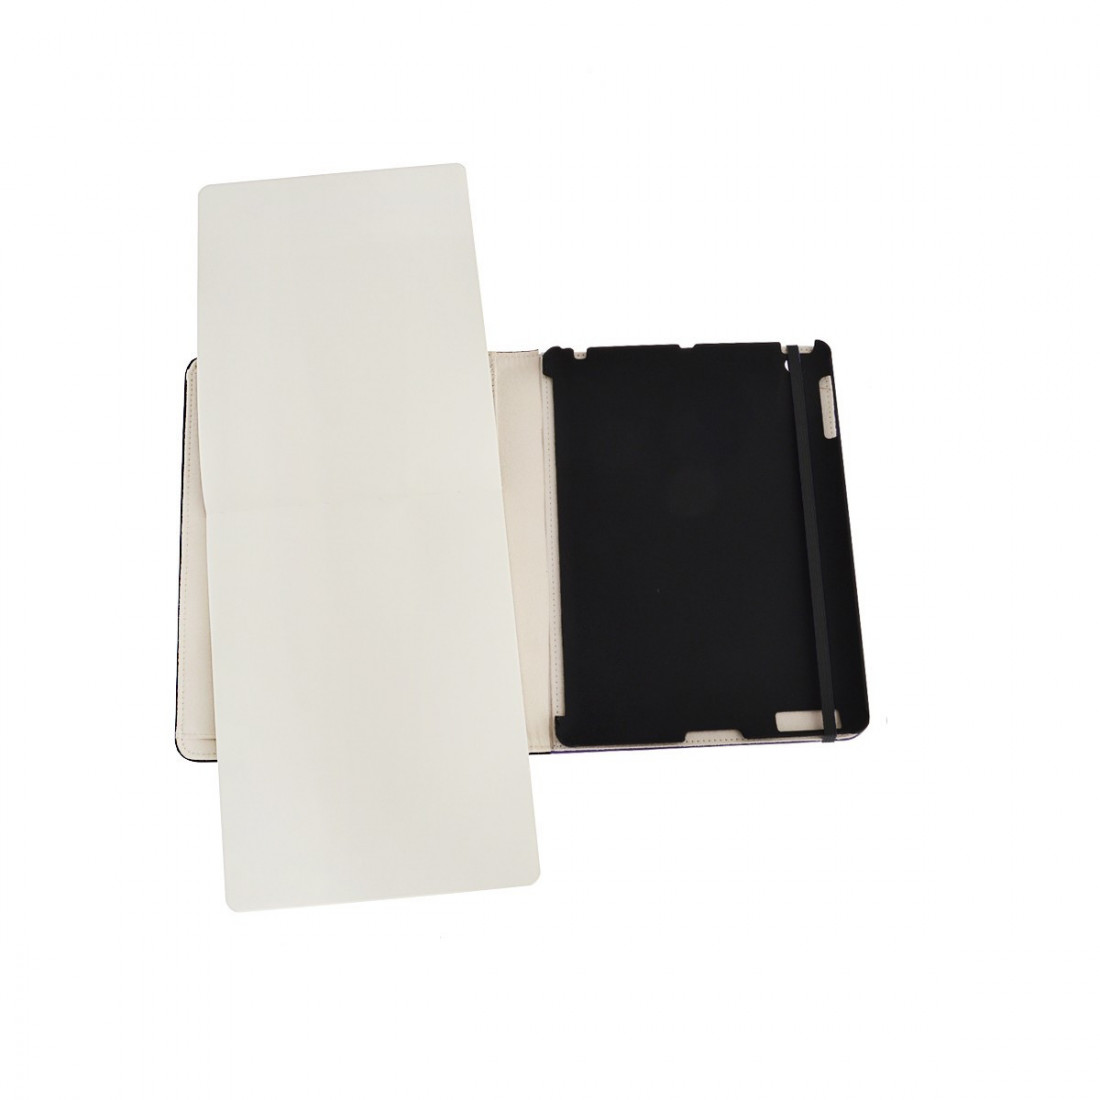 TABLET SLIM COVER BLACK FOR IPAD 3&4 WITH NOTEBOOK MOLESKINE